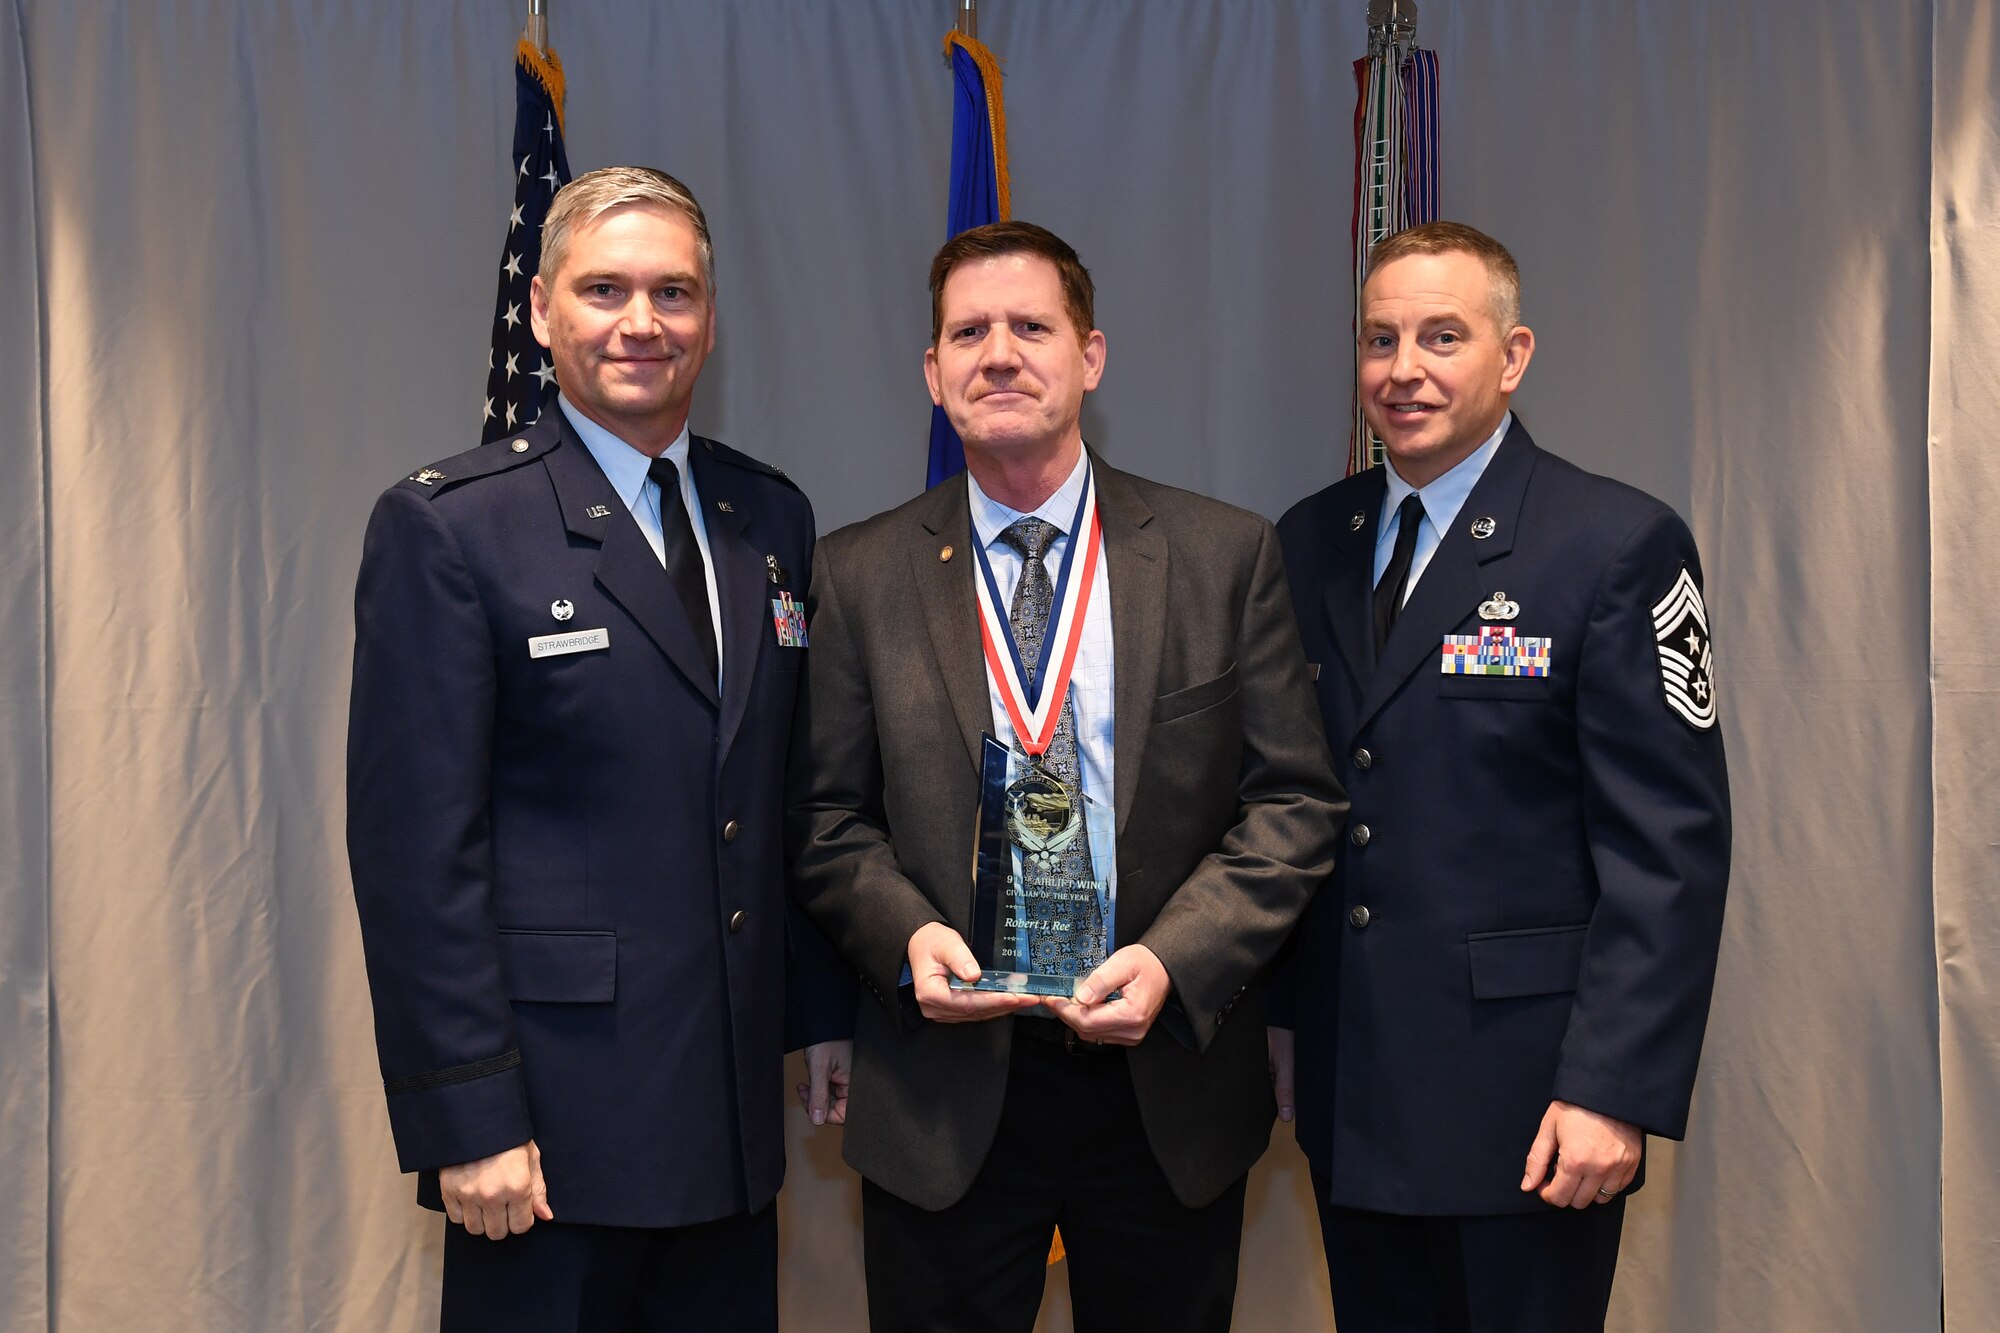 Robert Ree, director of the 911th Airman and Family Readiness Office, is awarded 911th Airlift Wing Civilian of the Year (Category II) by Col. Douglas N. Strawbridge, commander of the 911th AW, and Chief Master Sgt. Christopher D. Neitzel, command chief of the 911th AW, during the 911th AW Annual Award Ceremony at the Pittsburgh International Airport Air Reserve Station, Pennsylvania, March 2, 2019. The 2018 awards ceremony recognized Airmen who went above and beyond in their service for the year 2018. (U.S. Air Force photo by Senior Airman Grace Thomson)